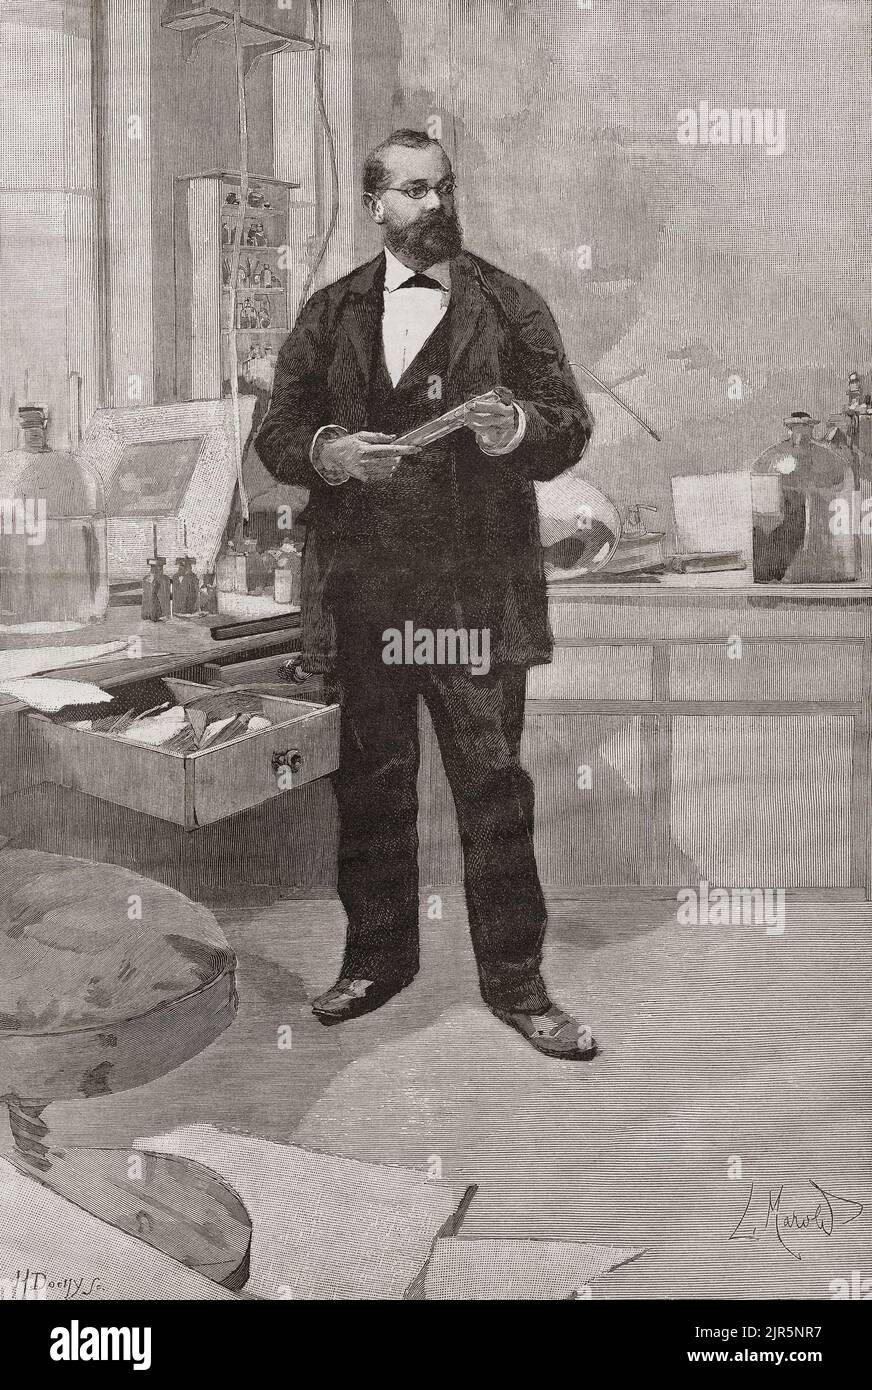 Heinrich Hermann Robert Koch, 1843 – 1910.  German physician and microbiologist.   Robert Koch was awarded the Nobel Prize in Physiology or Medicine in 1905.  Seen in his laboratory in this 19th century illustration. Stock Photo